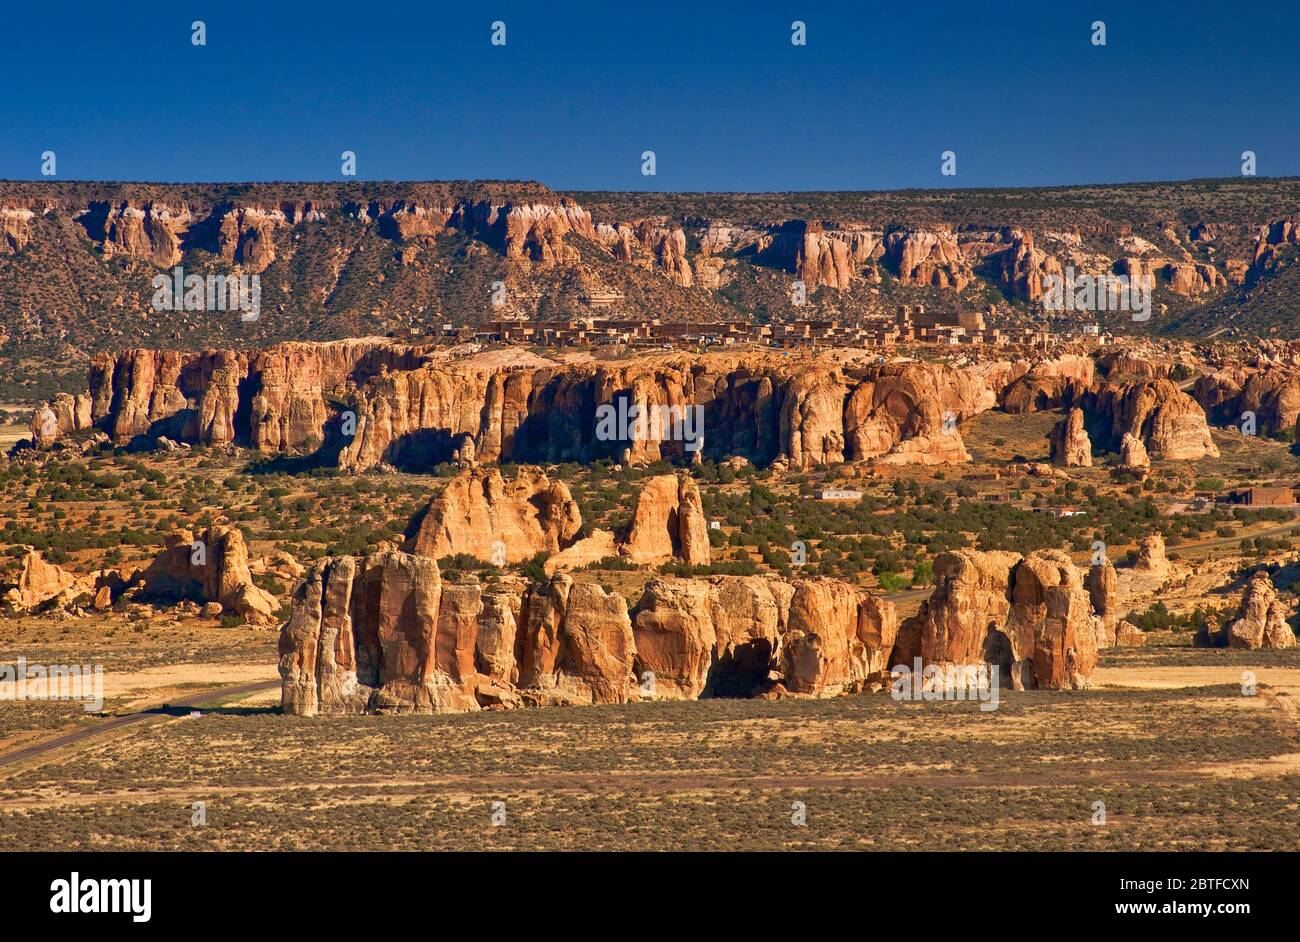 Acoma Pueblo (Sky City), Native American pueblo on top of a mesa in Acoma Indian Reservation, New Mexico, USA Stock Photo